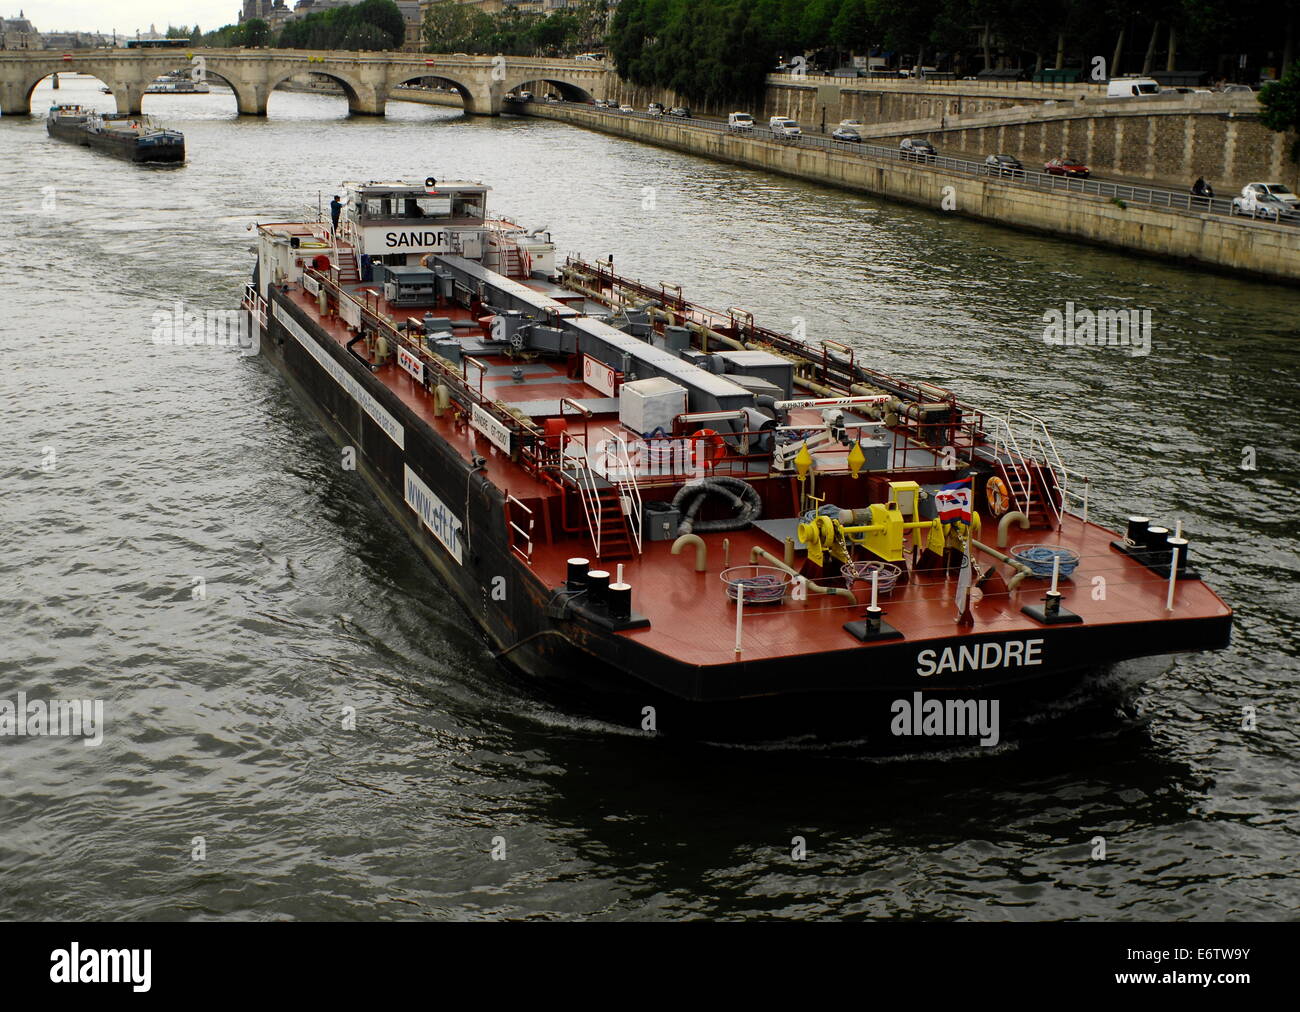 AJAXNETPHOTO. PARIS, FRANCE. - AN OIL BARGE MAKES ITS WAY THROUGH THE HEART OF THE CITY ON THE RIVER SEINE. PHOTO:JONATHAN EASTLAND/AJAX REF:121506 2806 Stock Photo